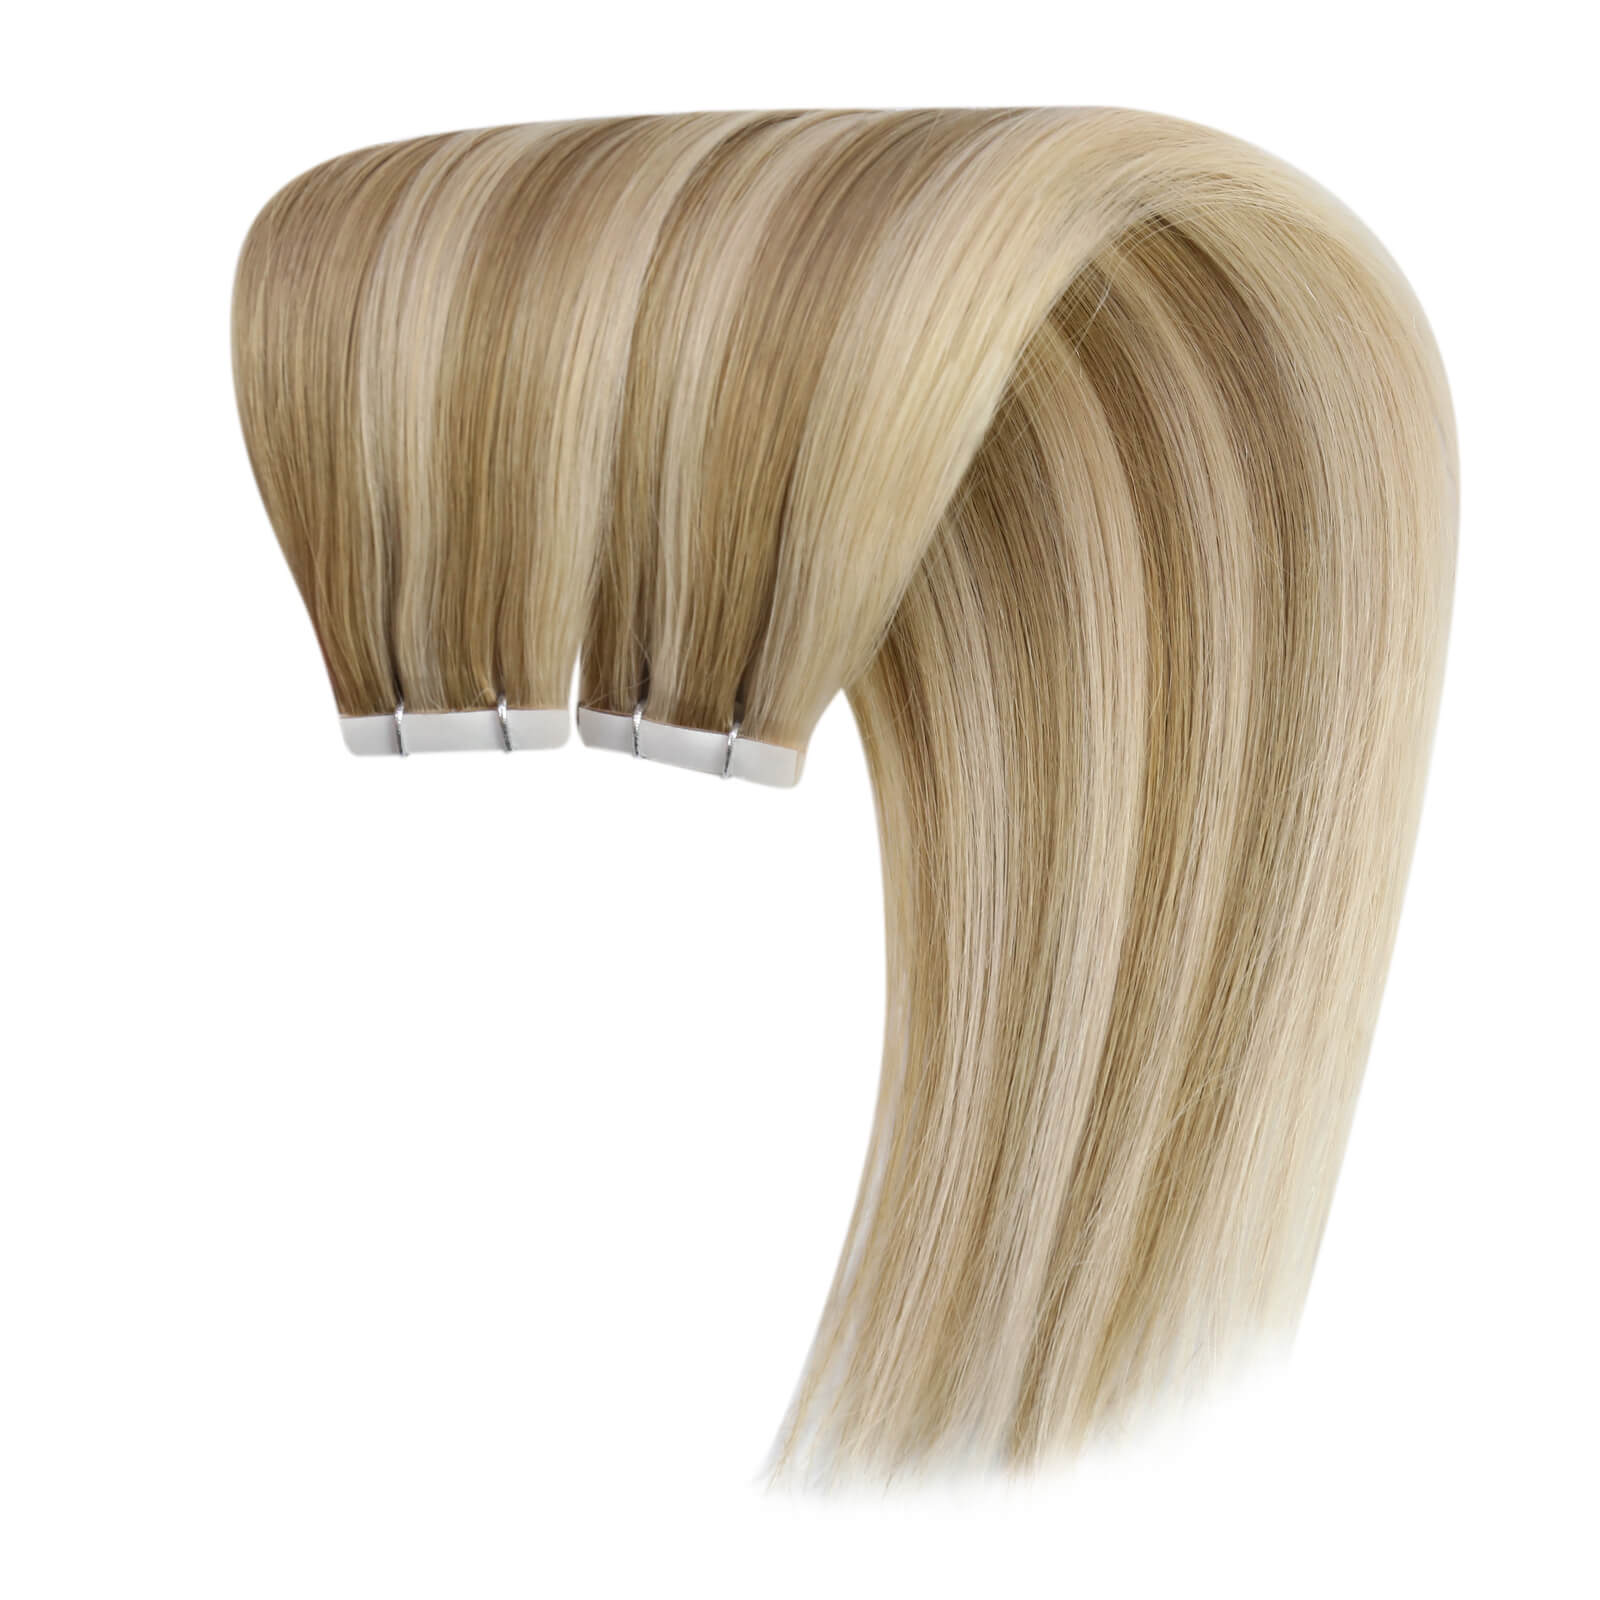 sunny hair extensions,tape hair extensions,human hair extensions, 18 inch hair extensions,best hair extensions,injection taoe,seamless tape hair,